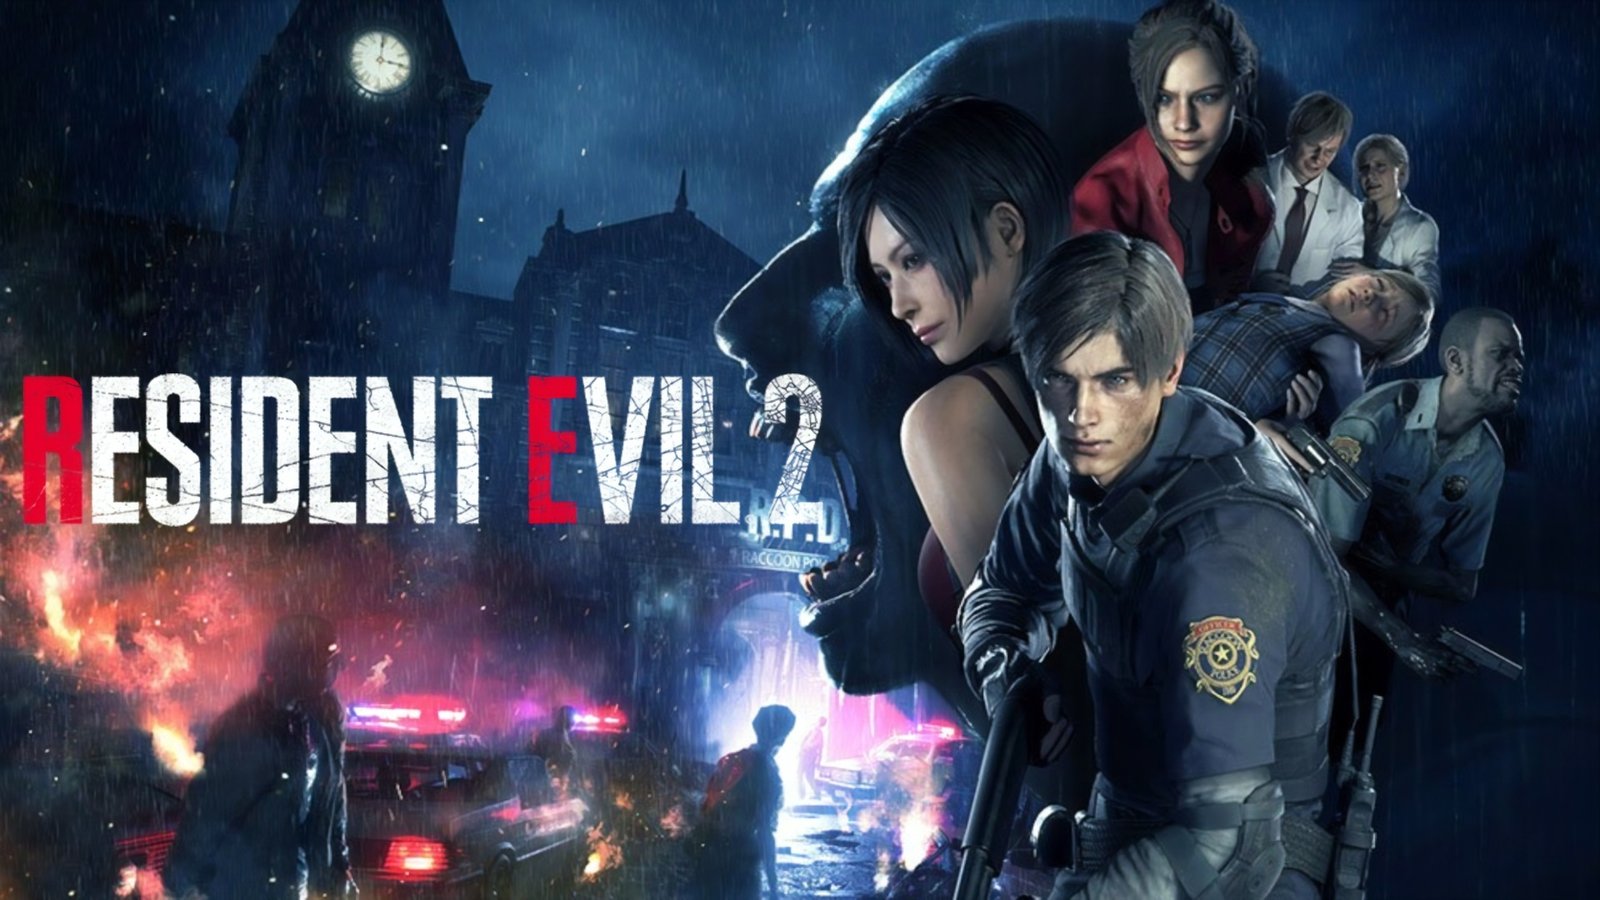 7 Resident Evil 2 Wallpapers Hd Visual Arts Ideas